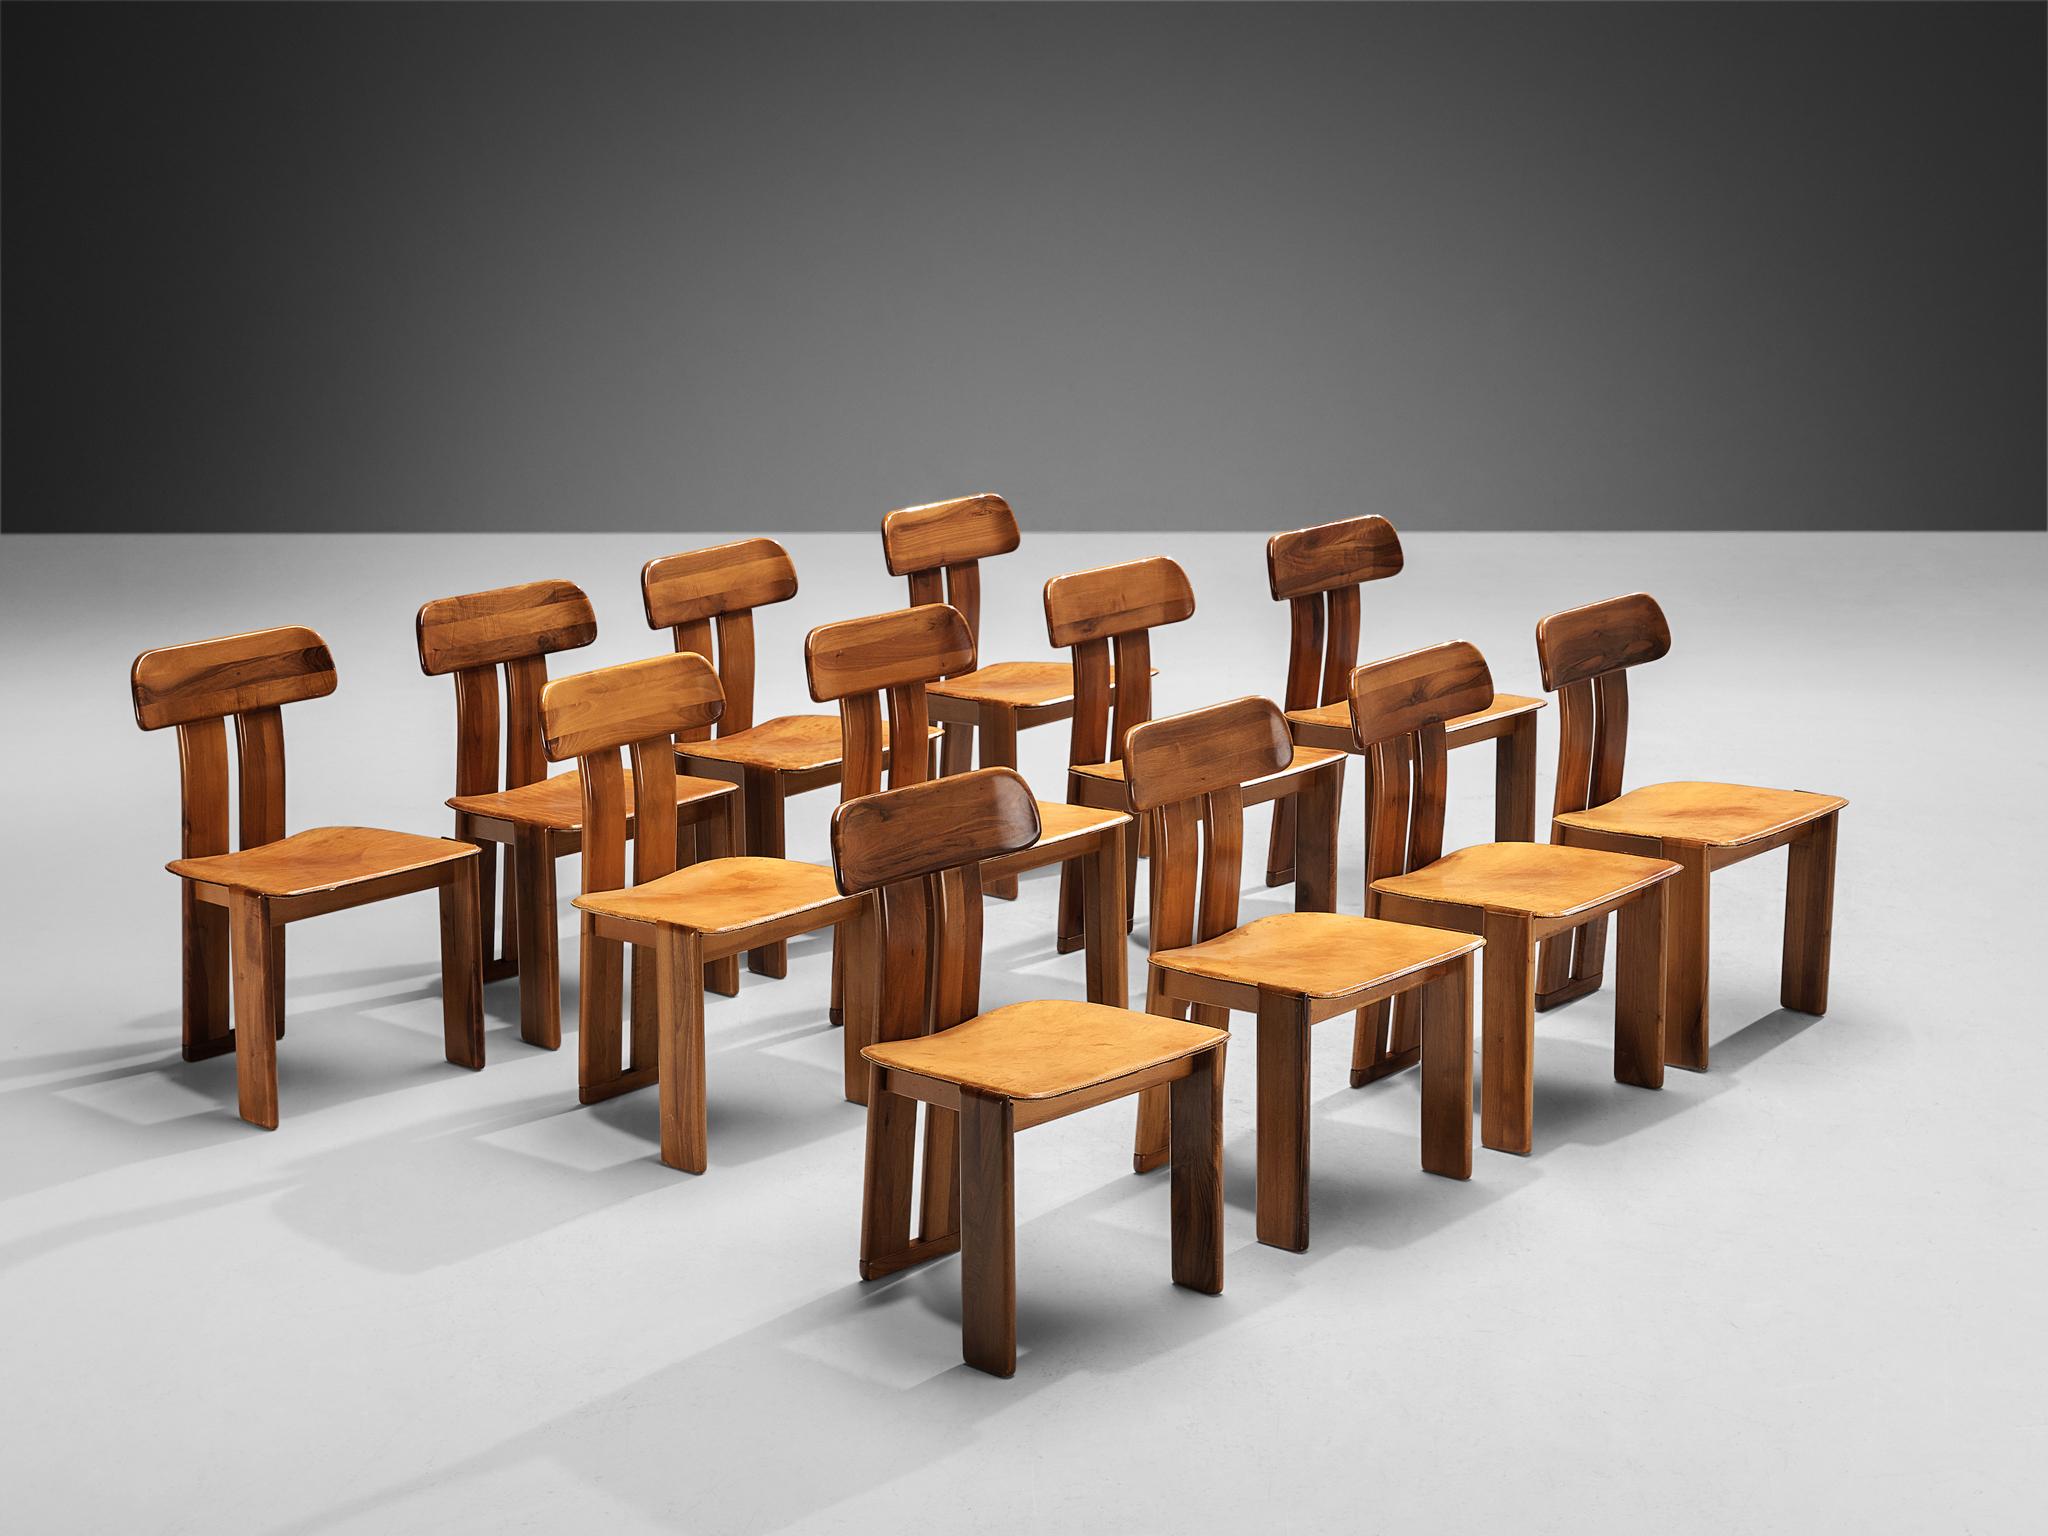 Mario Marenco for Mobil Girgi, set of twelve dining chairs model ‘Sapporo’, walnut, cognac leather, Italy, 1970s

These chairs feature wonderful backrests, consisting of two vertical slats distanced from each other. At the bottom and top these are